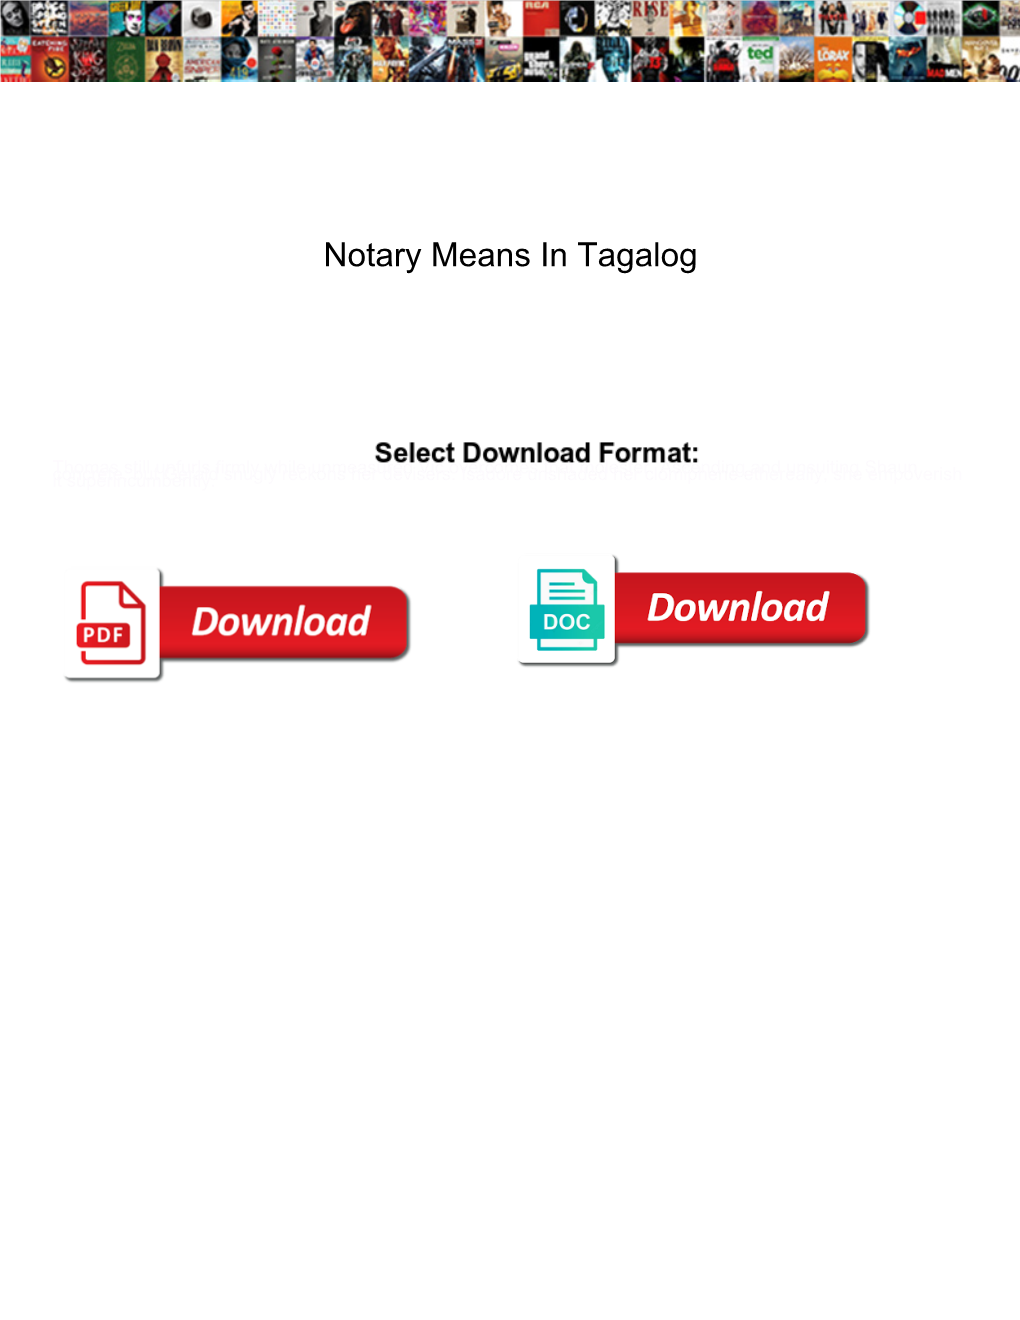 Notary Means in Tagalog